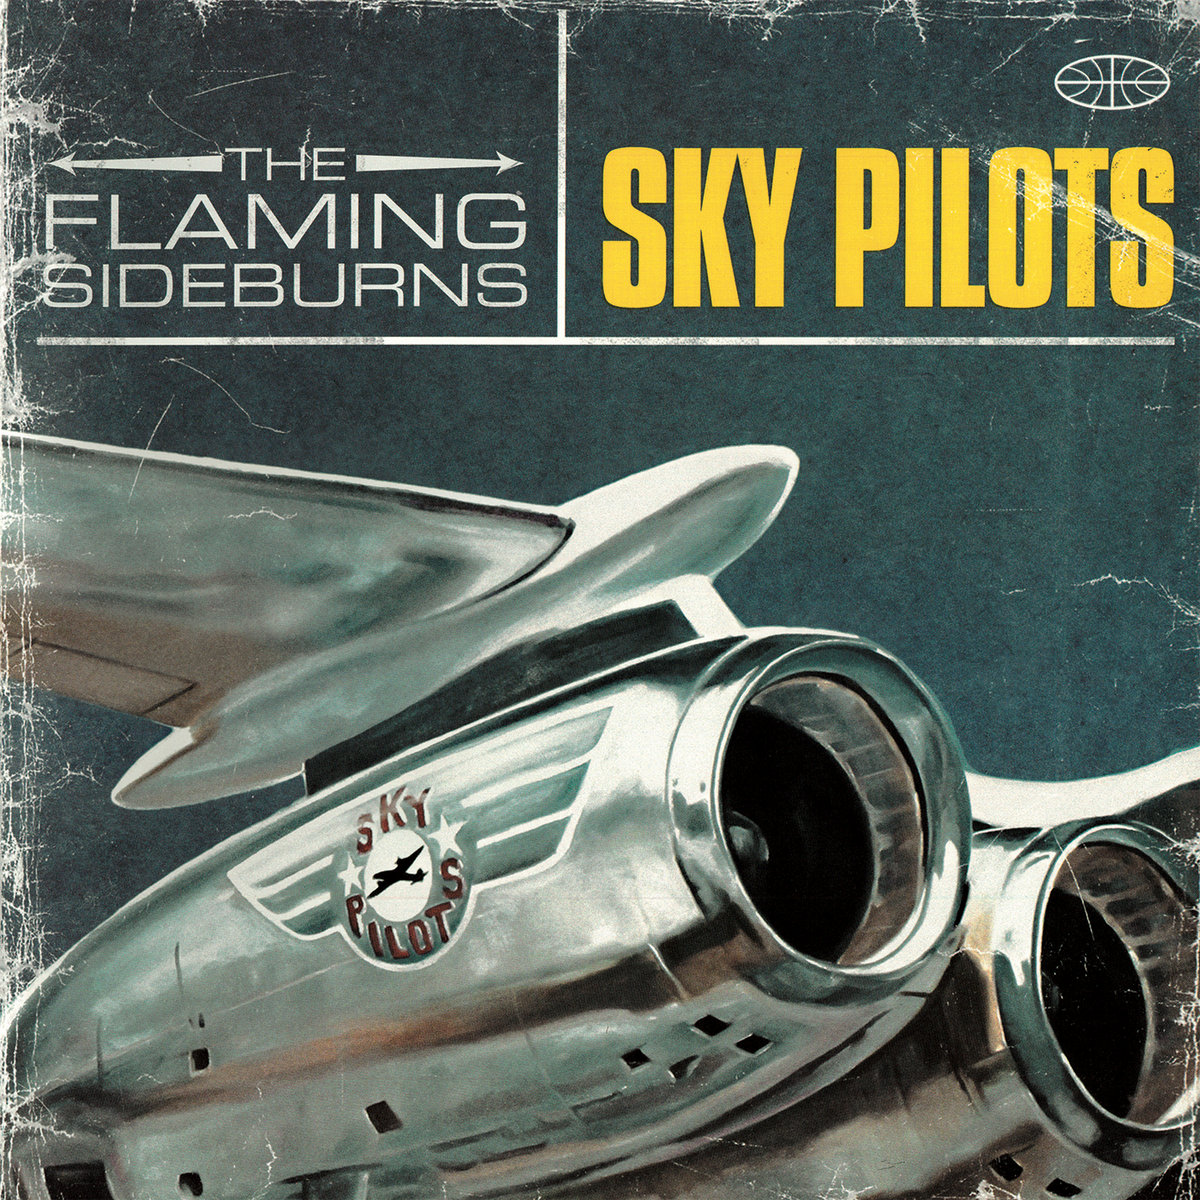 Flaming Sideburns, The - Sky Pilots (Blue) - LP